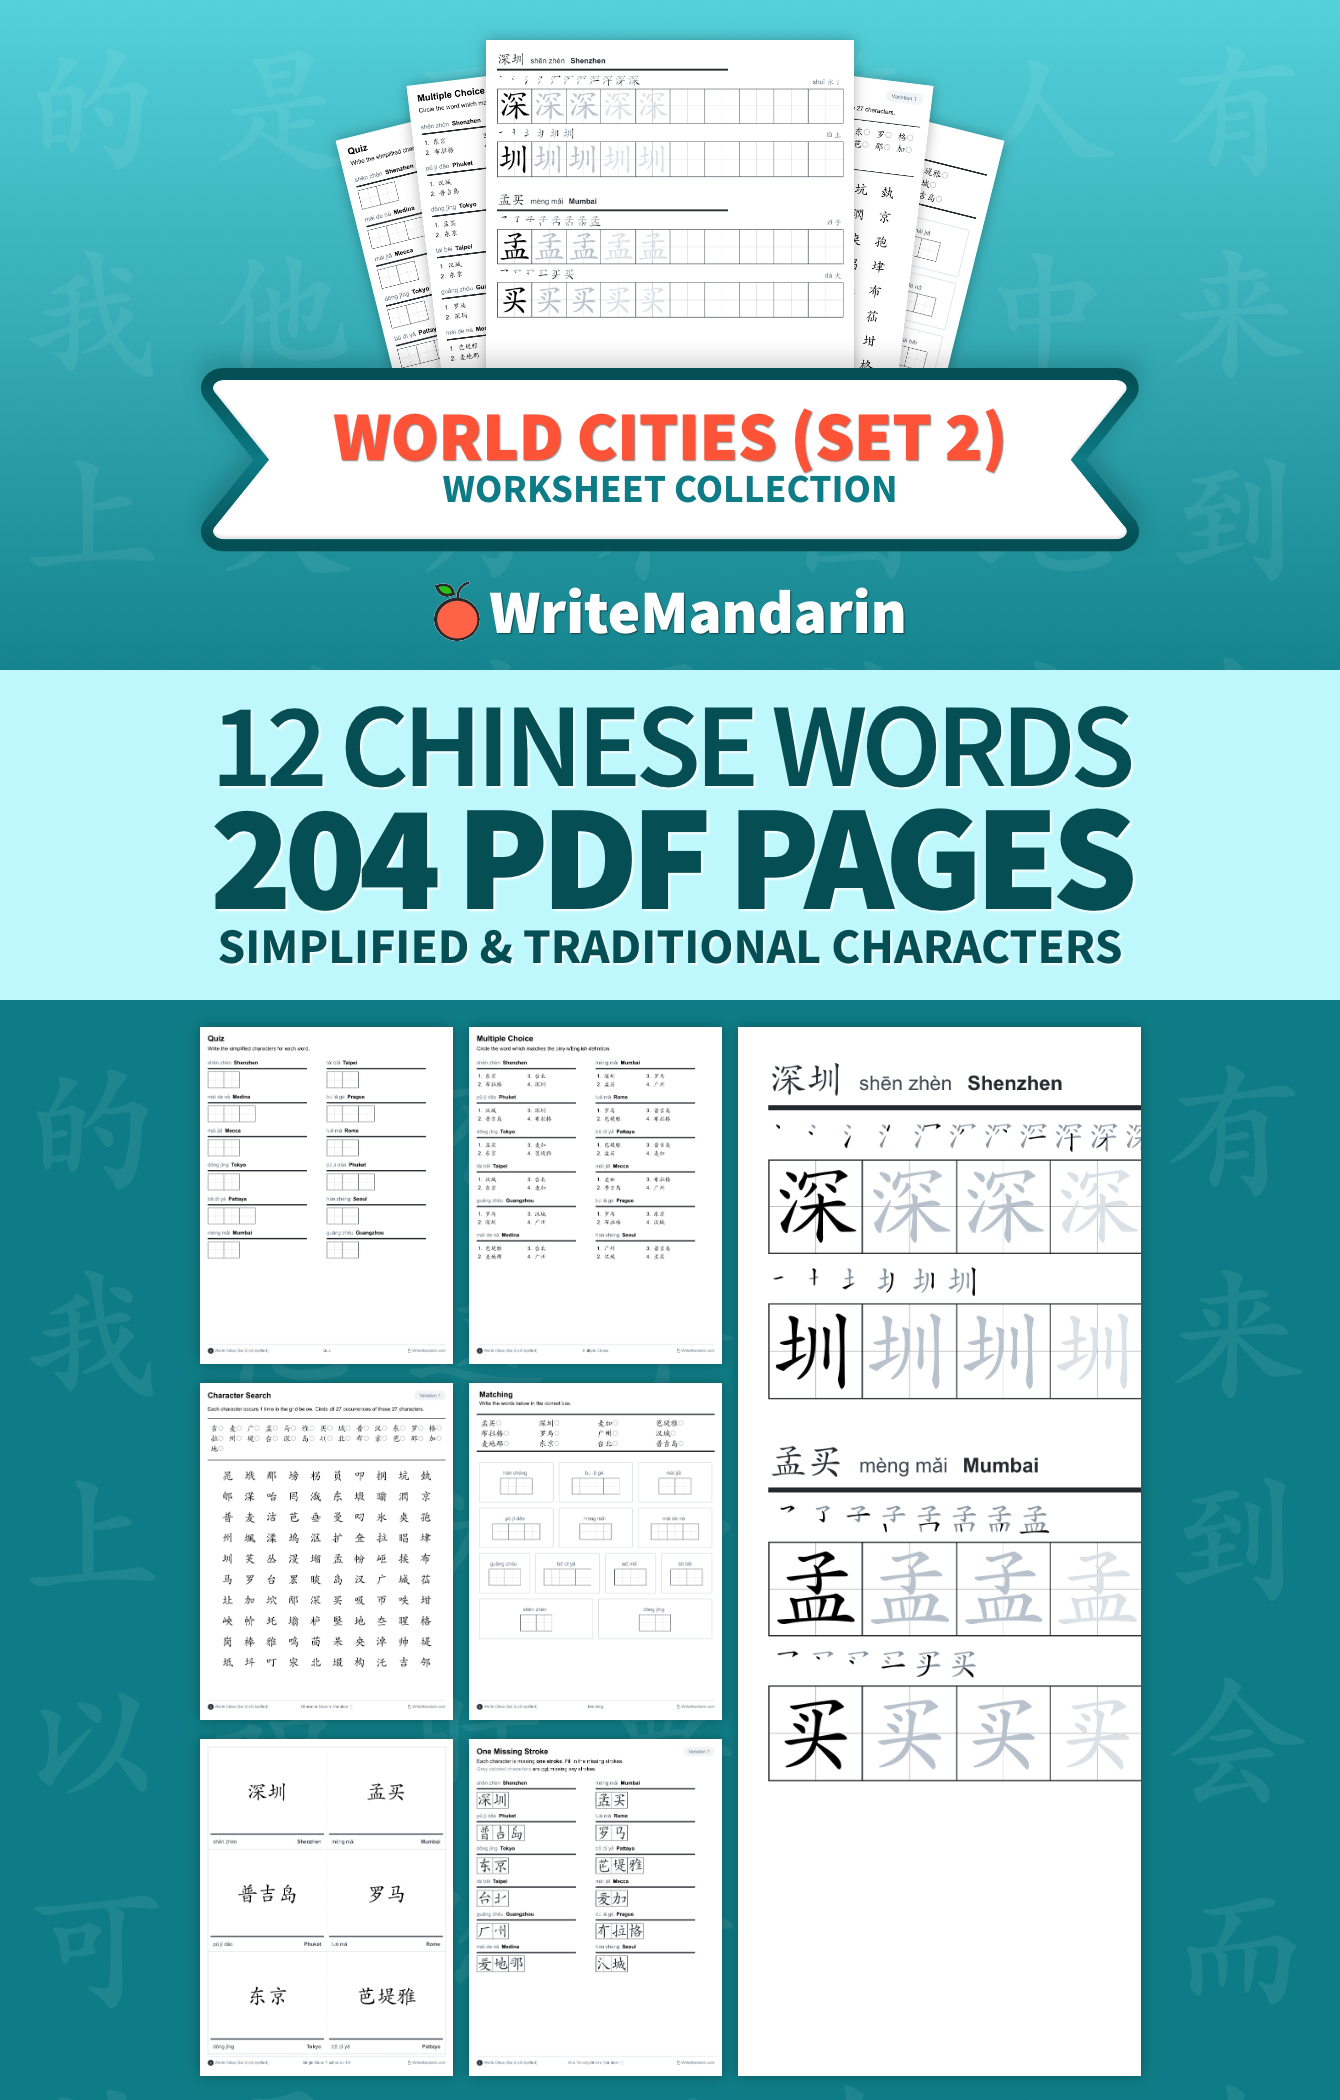 Preview image of World Cities (Set 2) worksheet collection